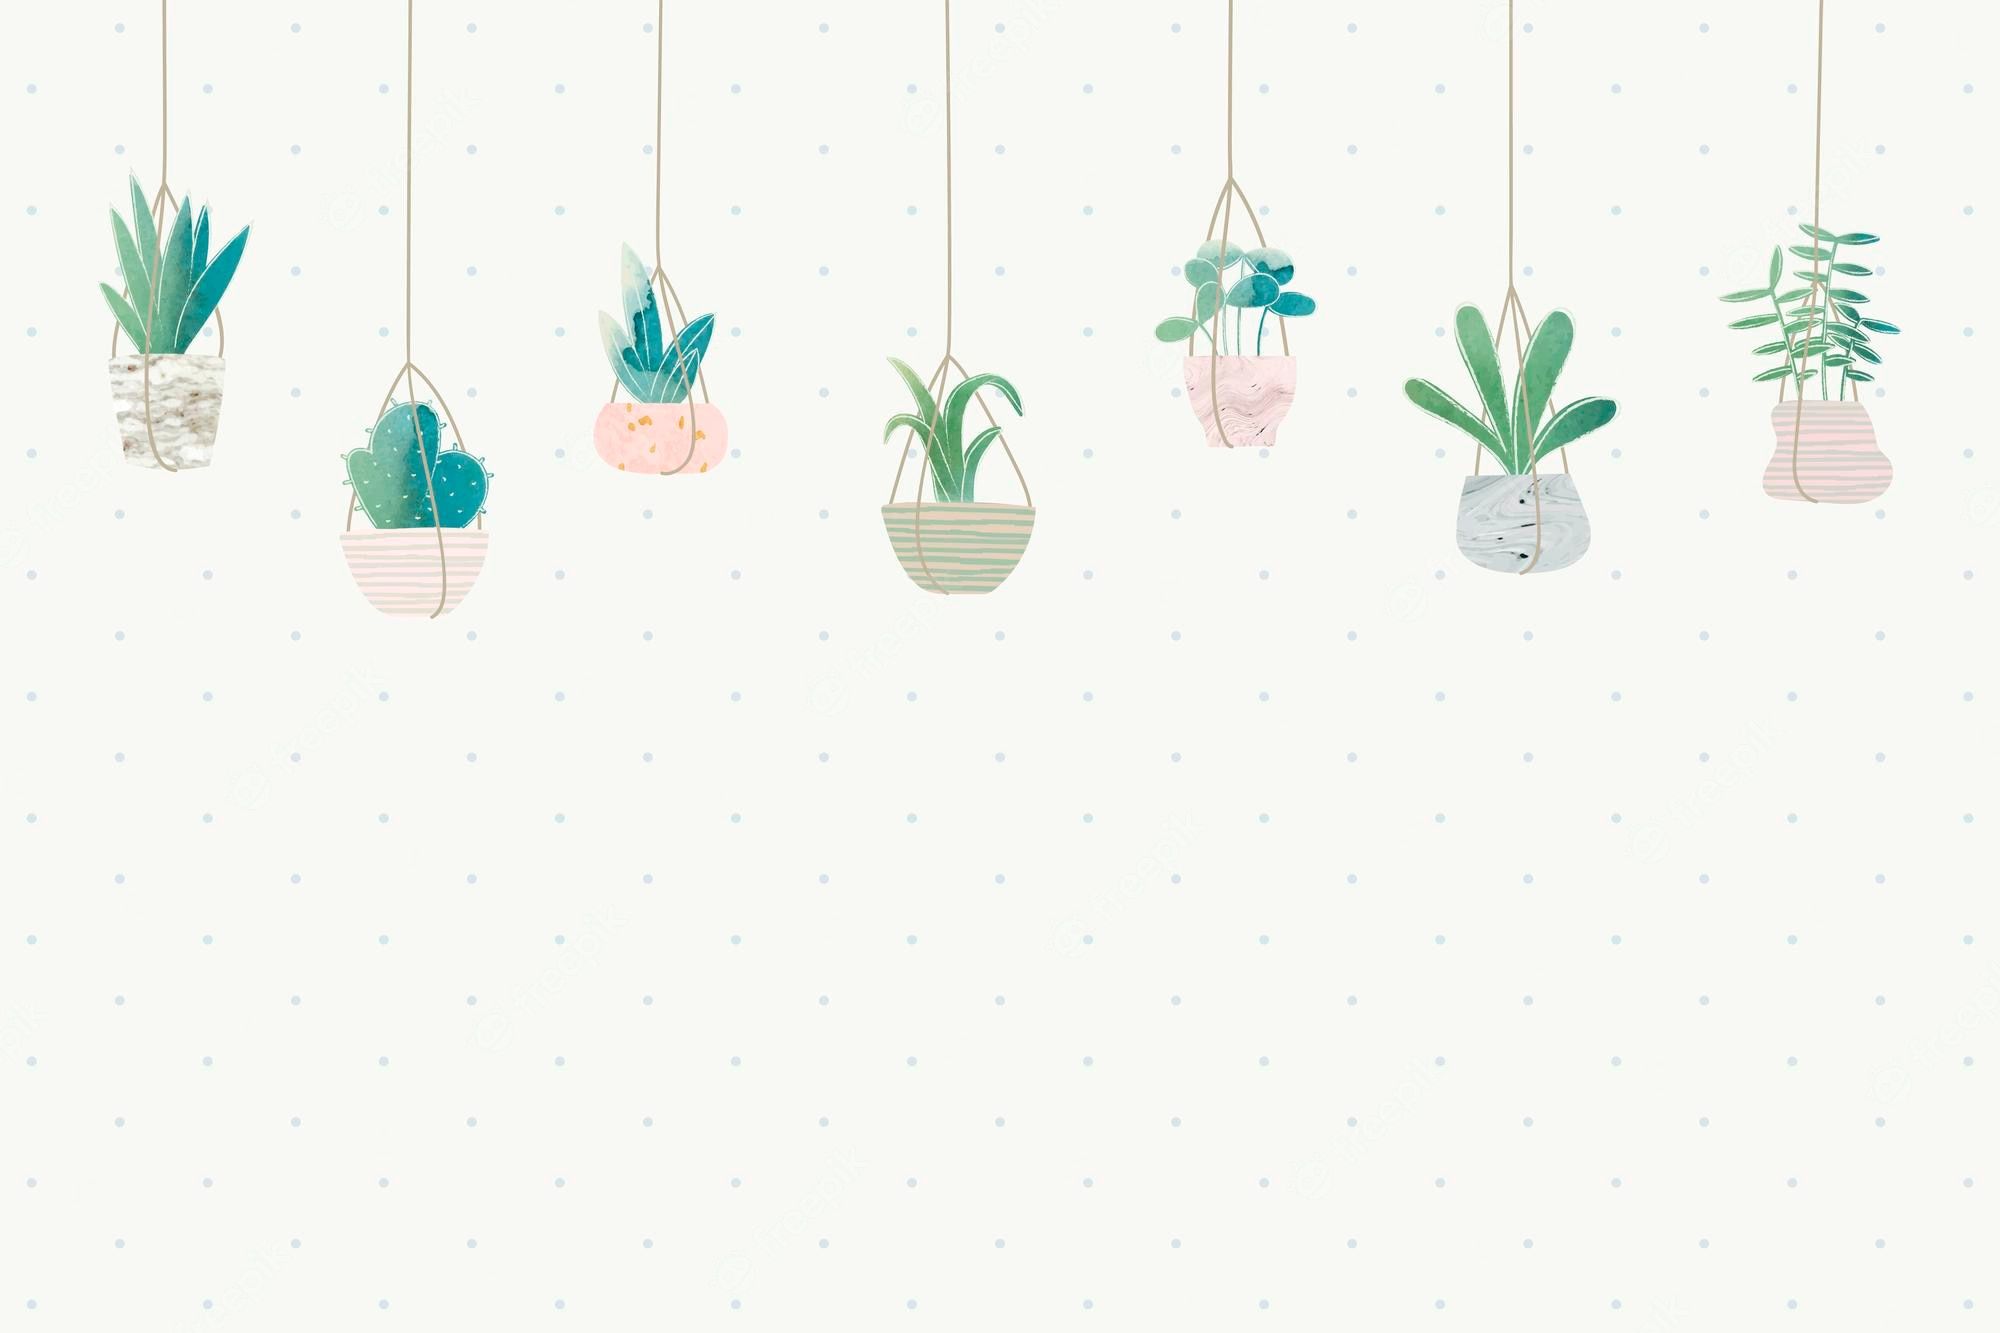 A set of hanging plants on strings - Cactus